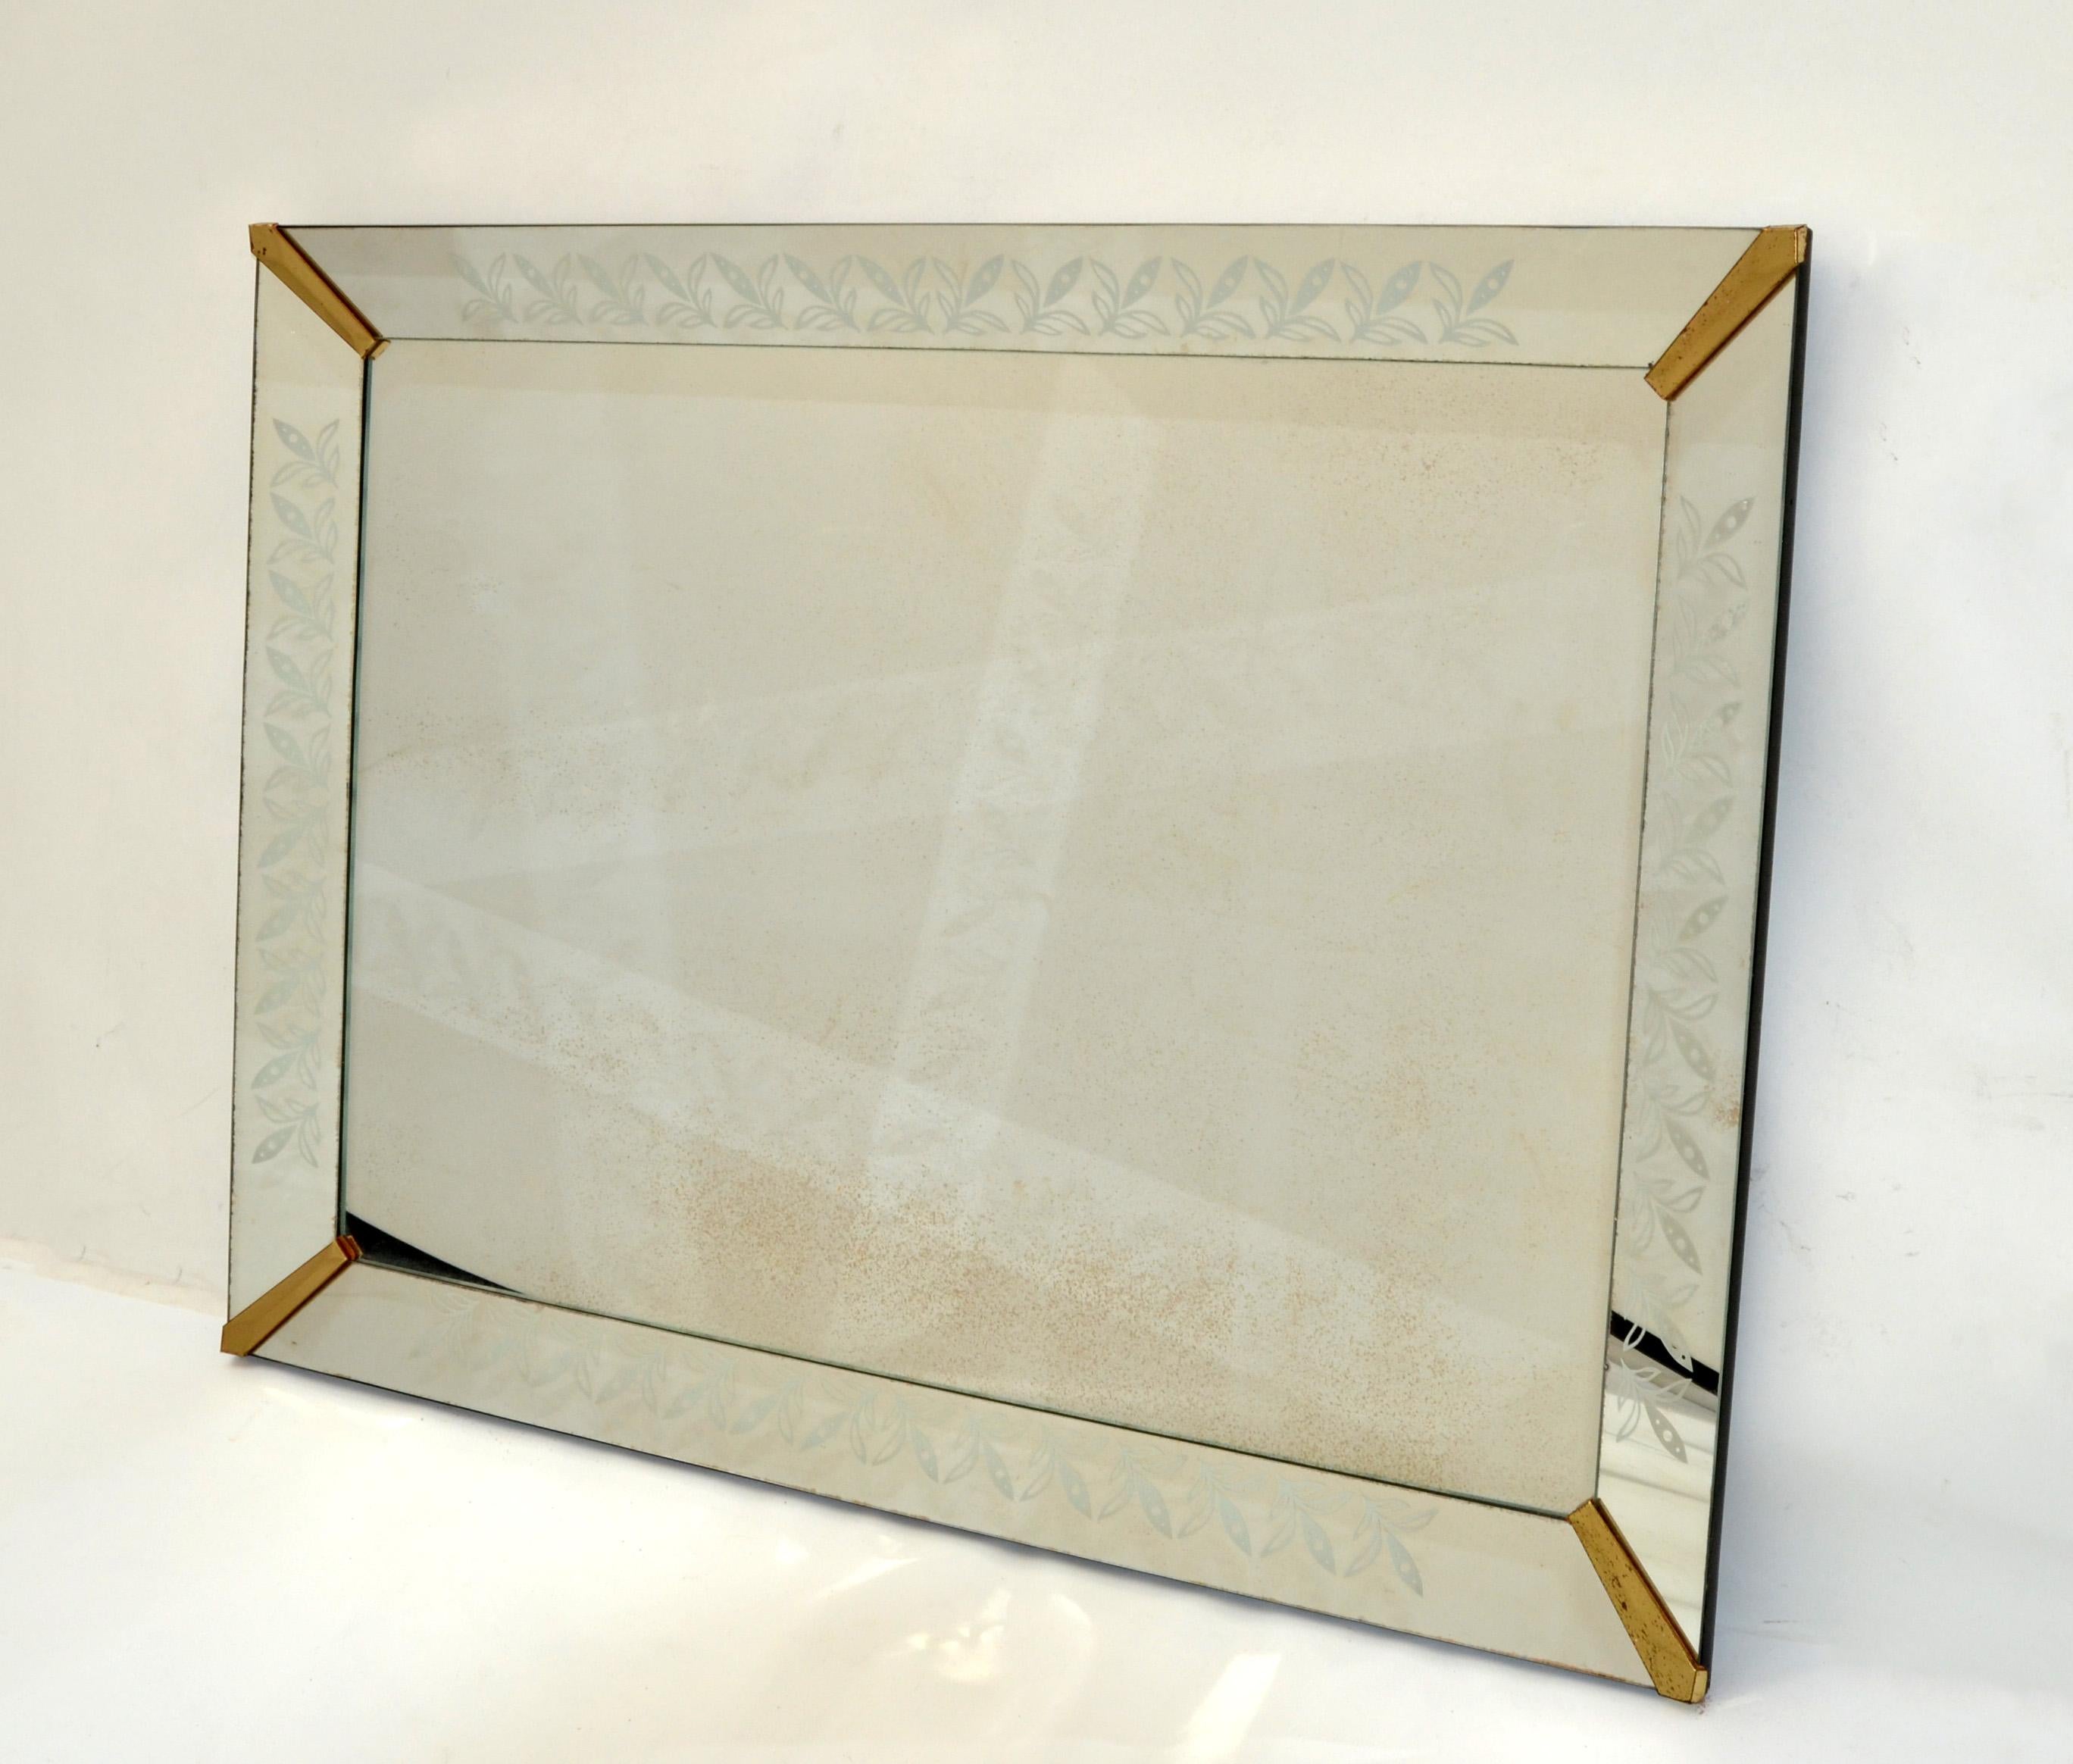 Italian 1940s Art Deco Venetian Style Etched Wall Mirror with Brass Finished Corners For Sale